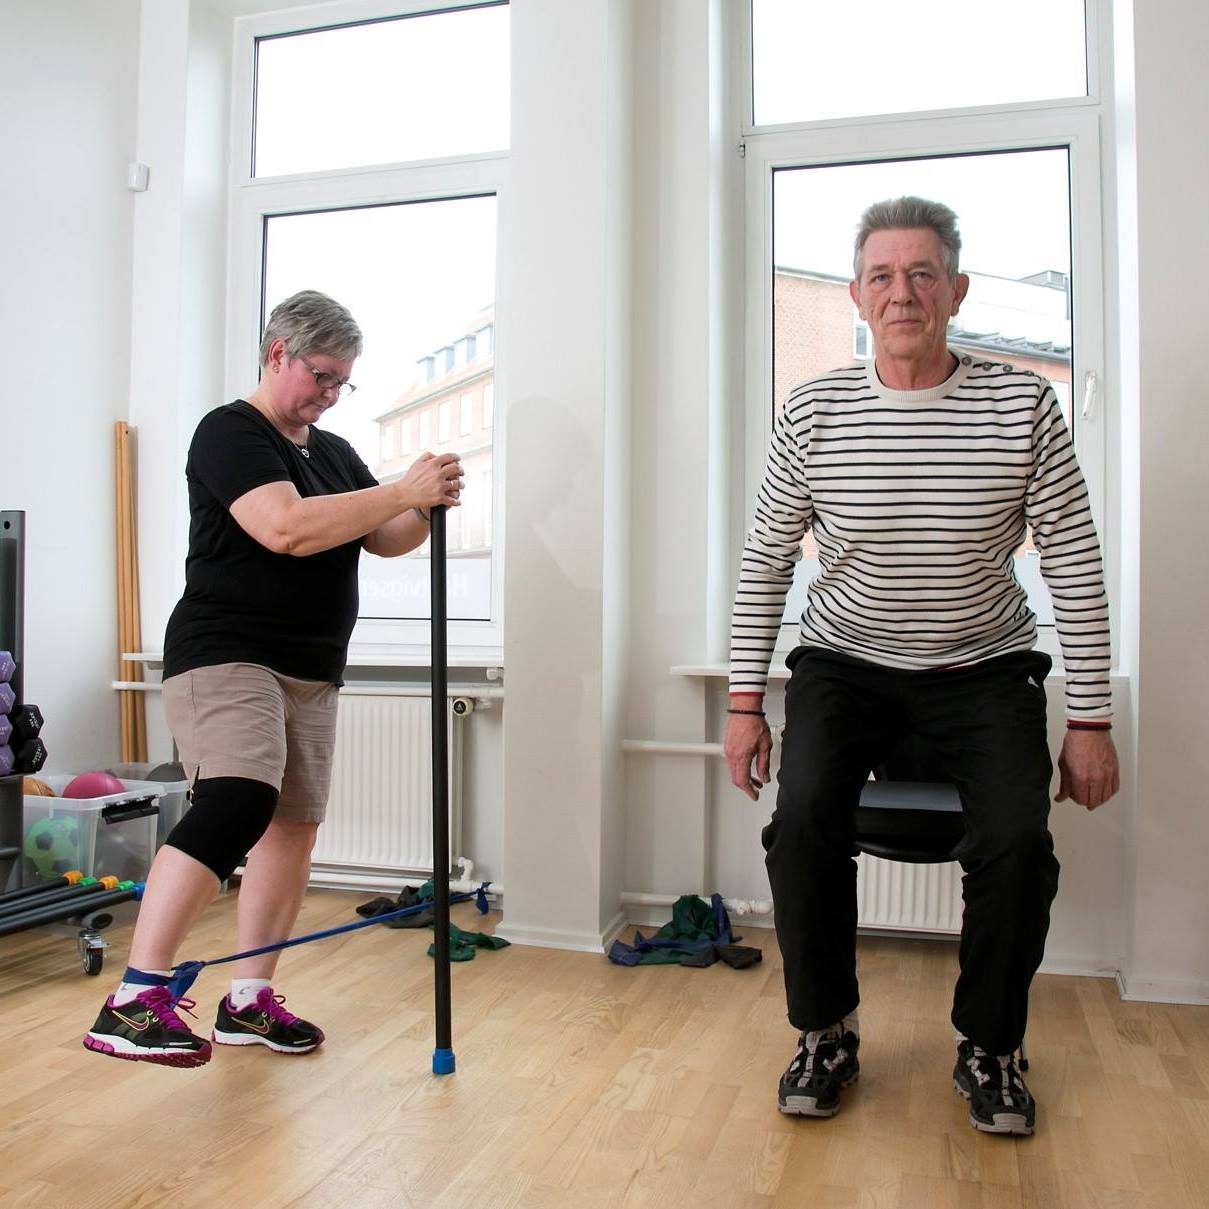 Education and exercise program developed for people with hip or knee osteoarthritis symptoms.